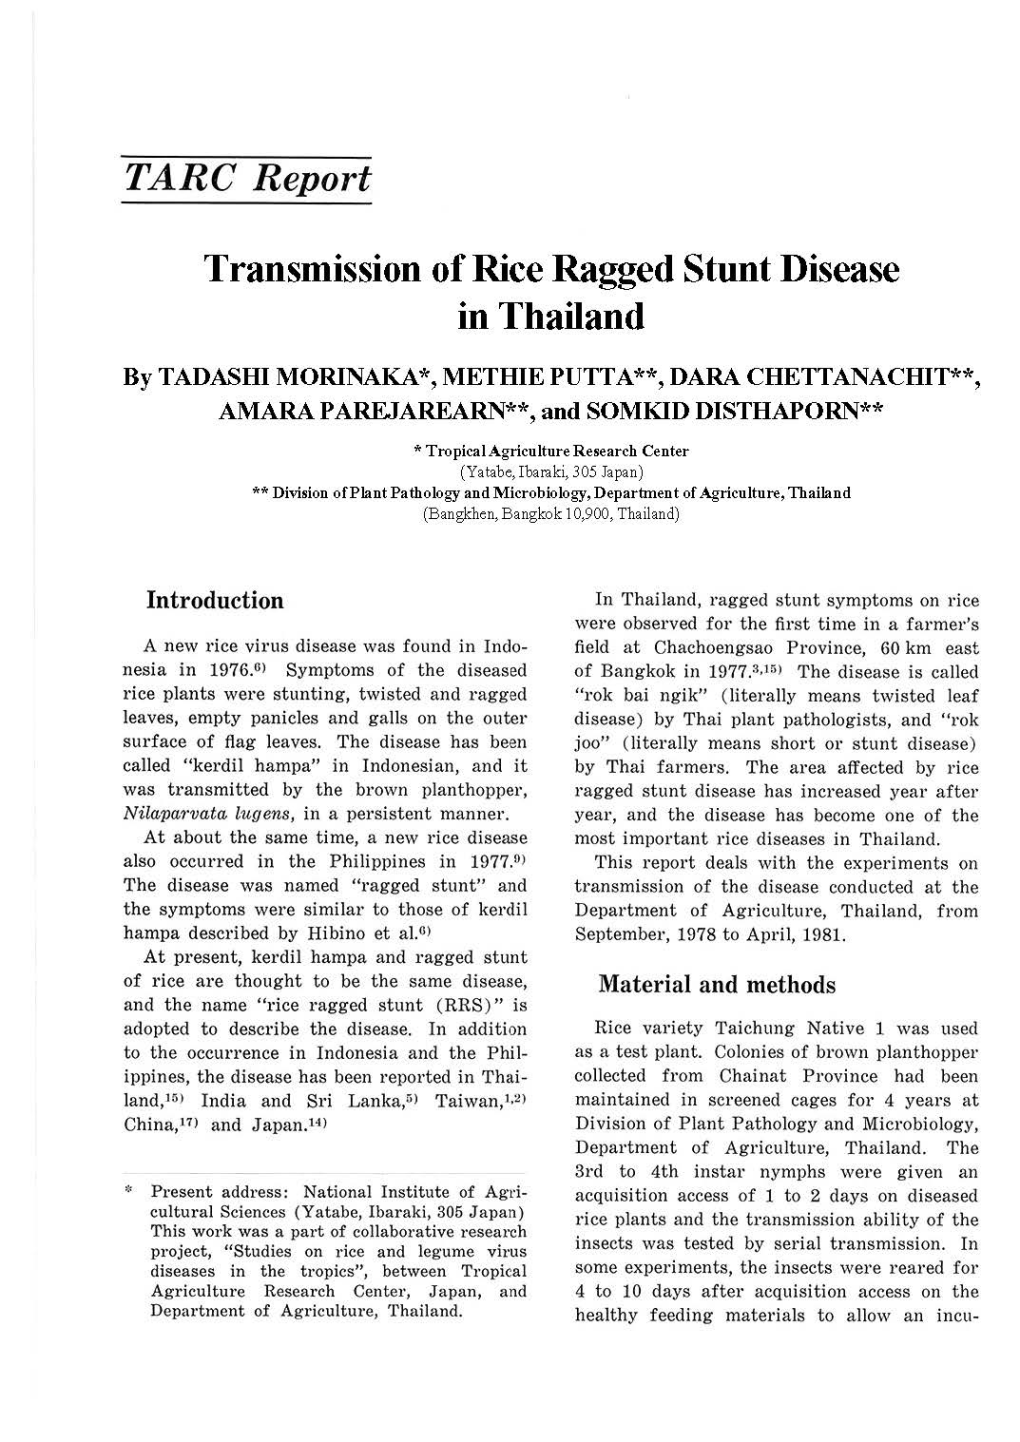 TARC Report Transmission of Rice Ragged Stunt Disease in Thailand